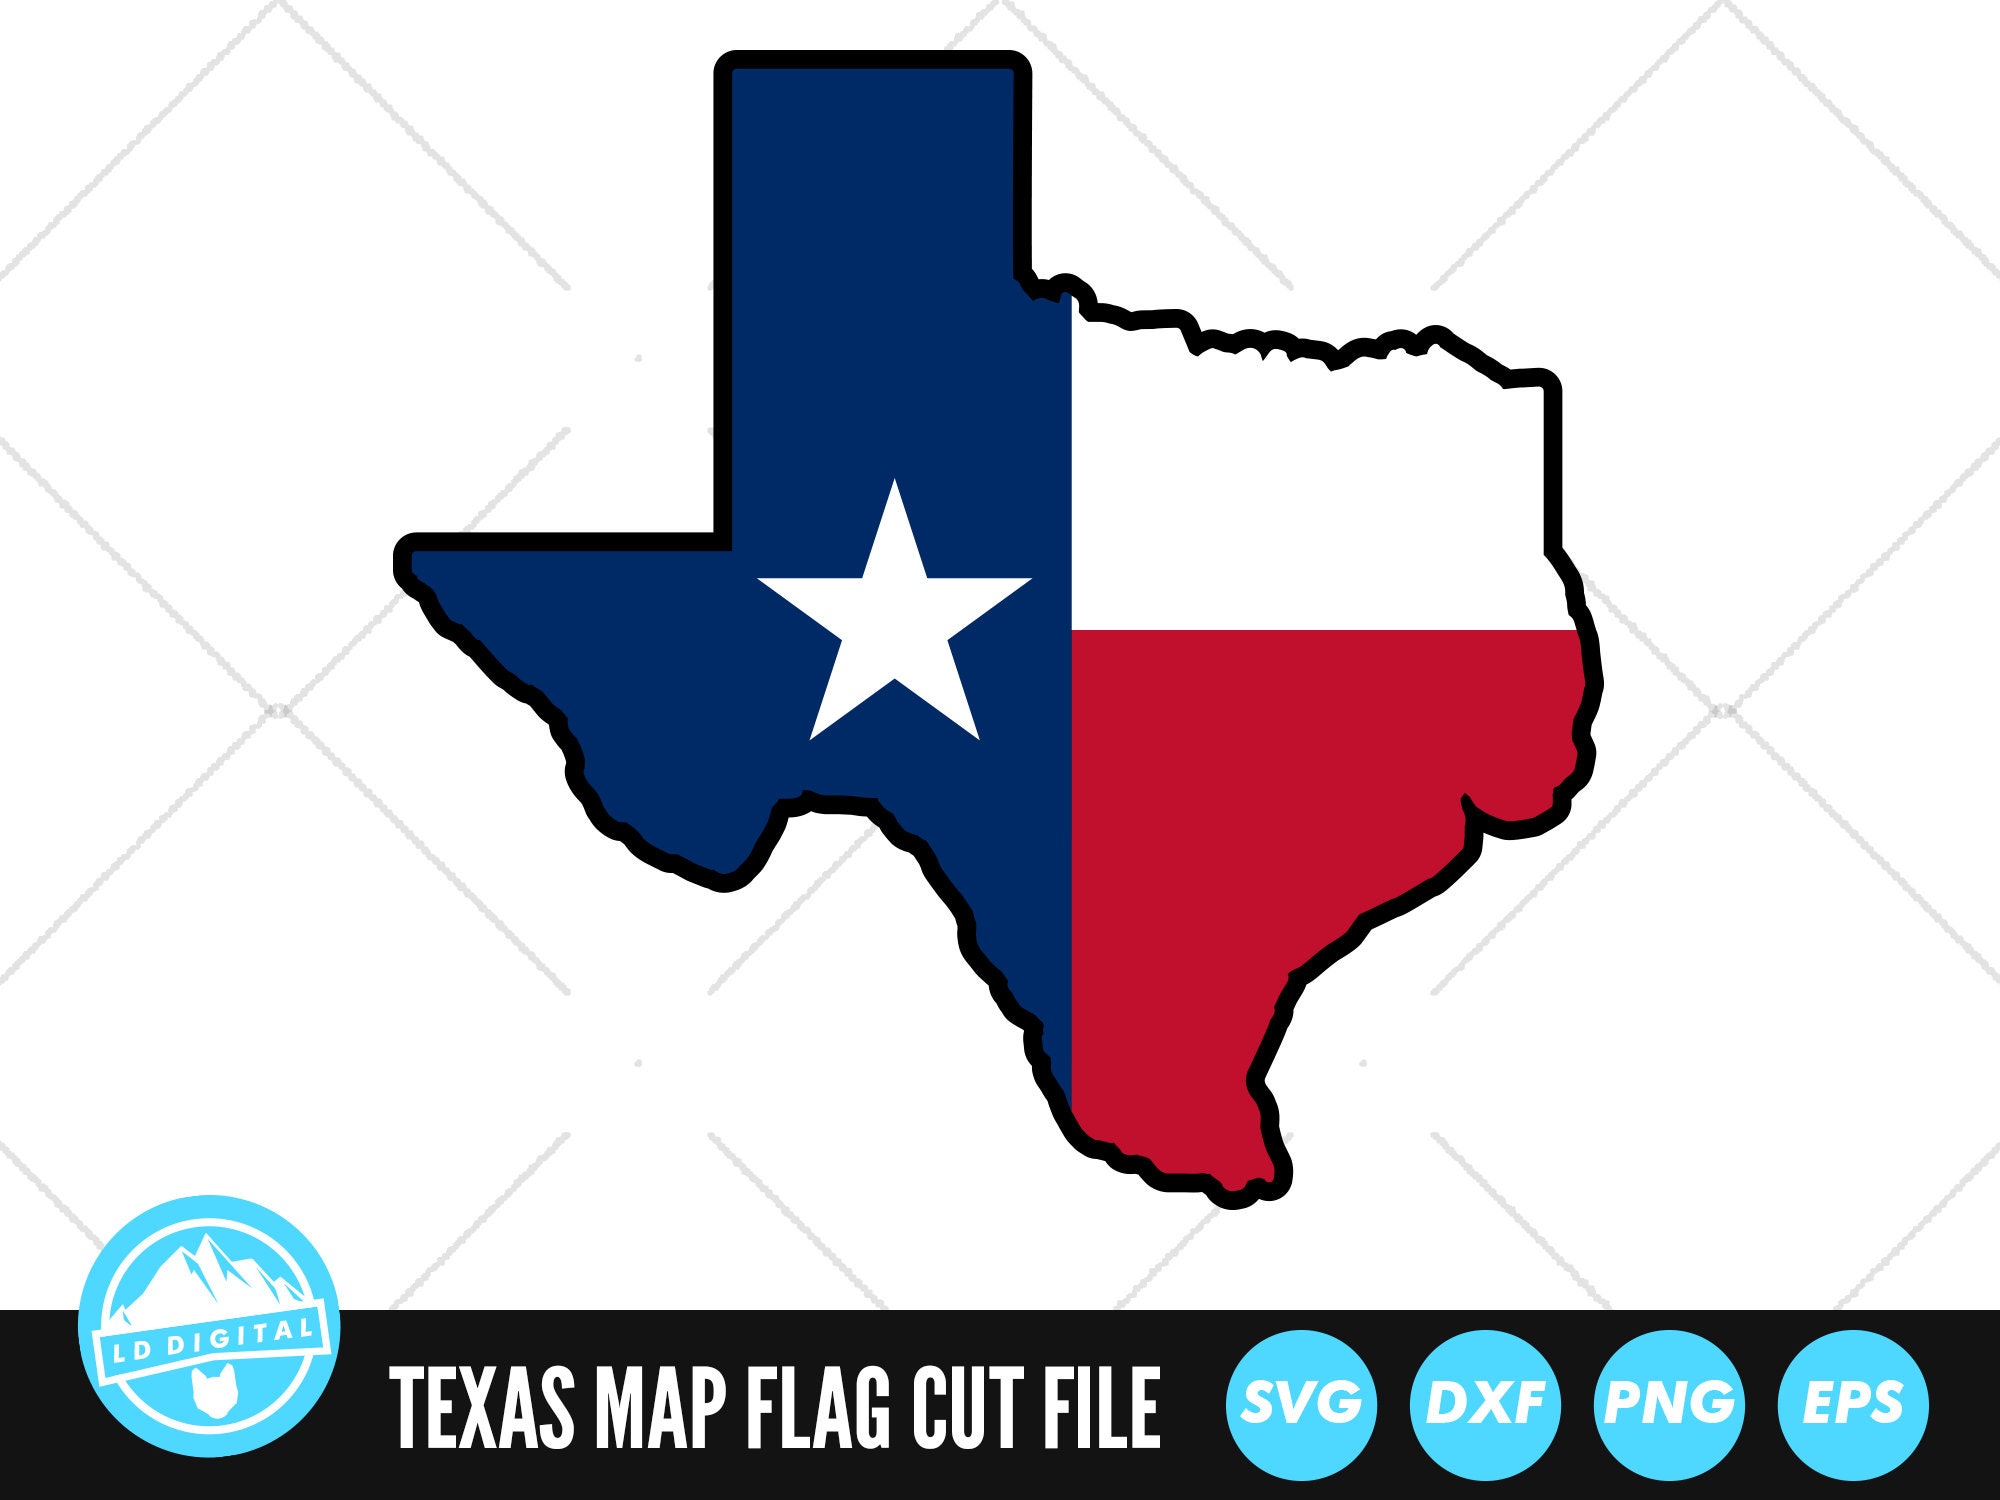 Texas Rangers Logo PNG vector in SVG, PDF, AI, CDR format